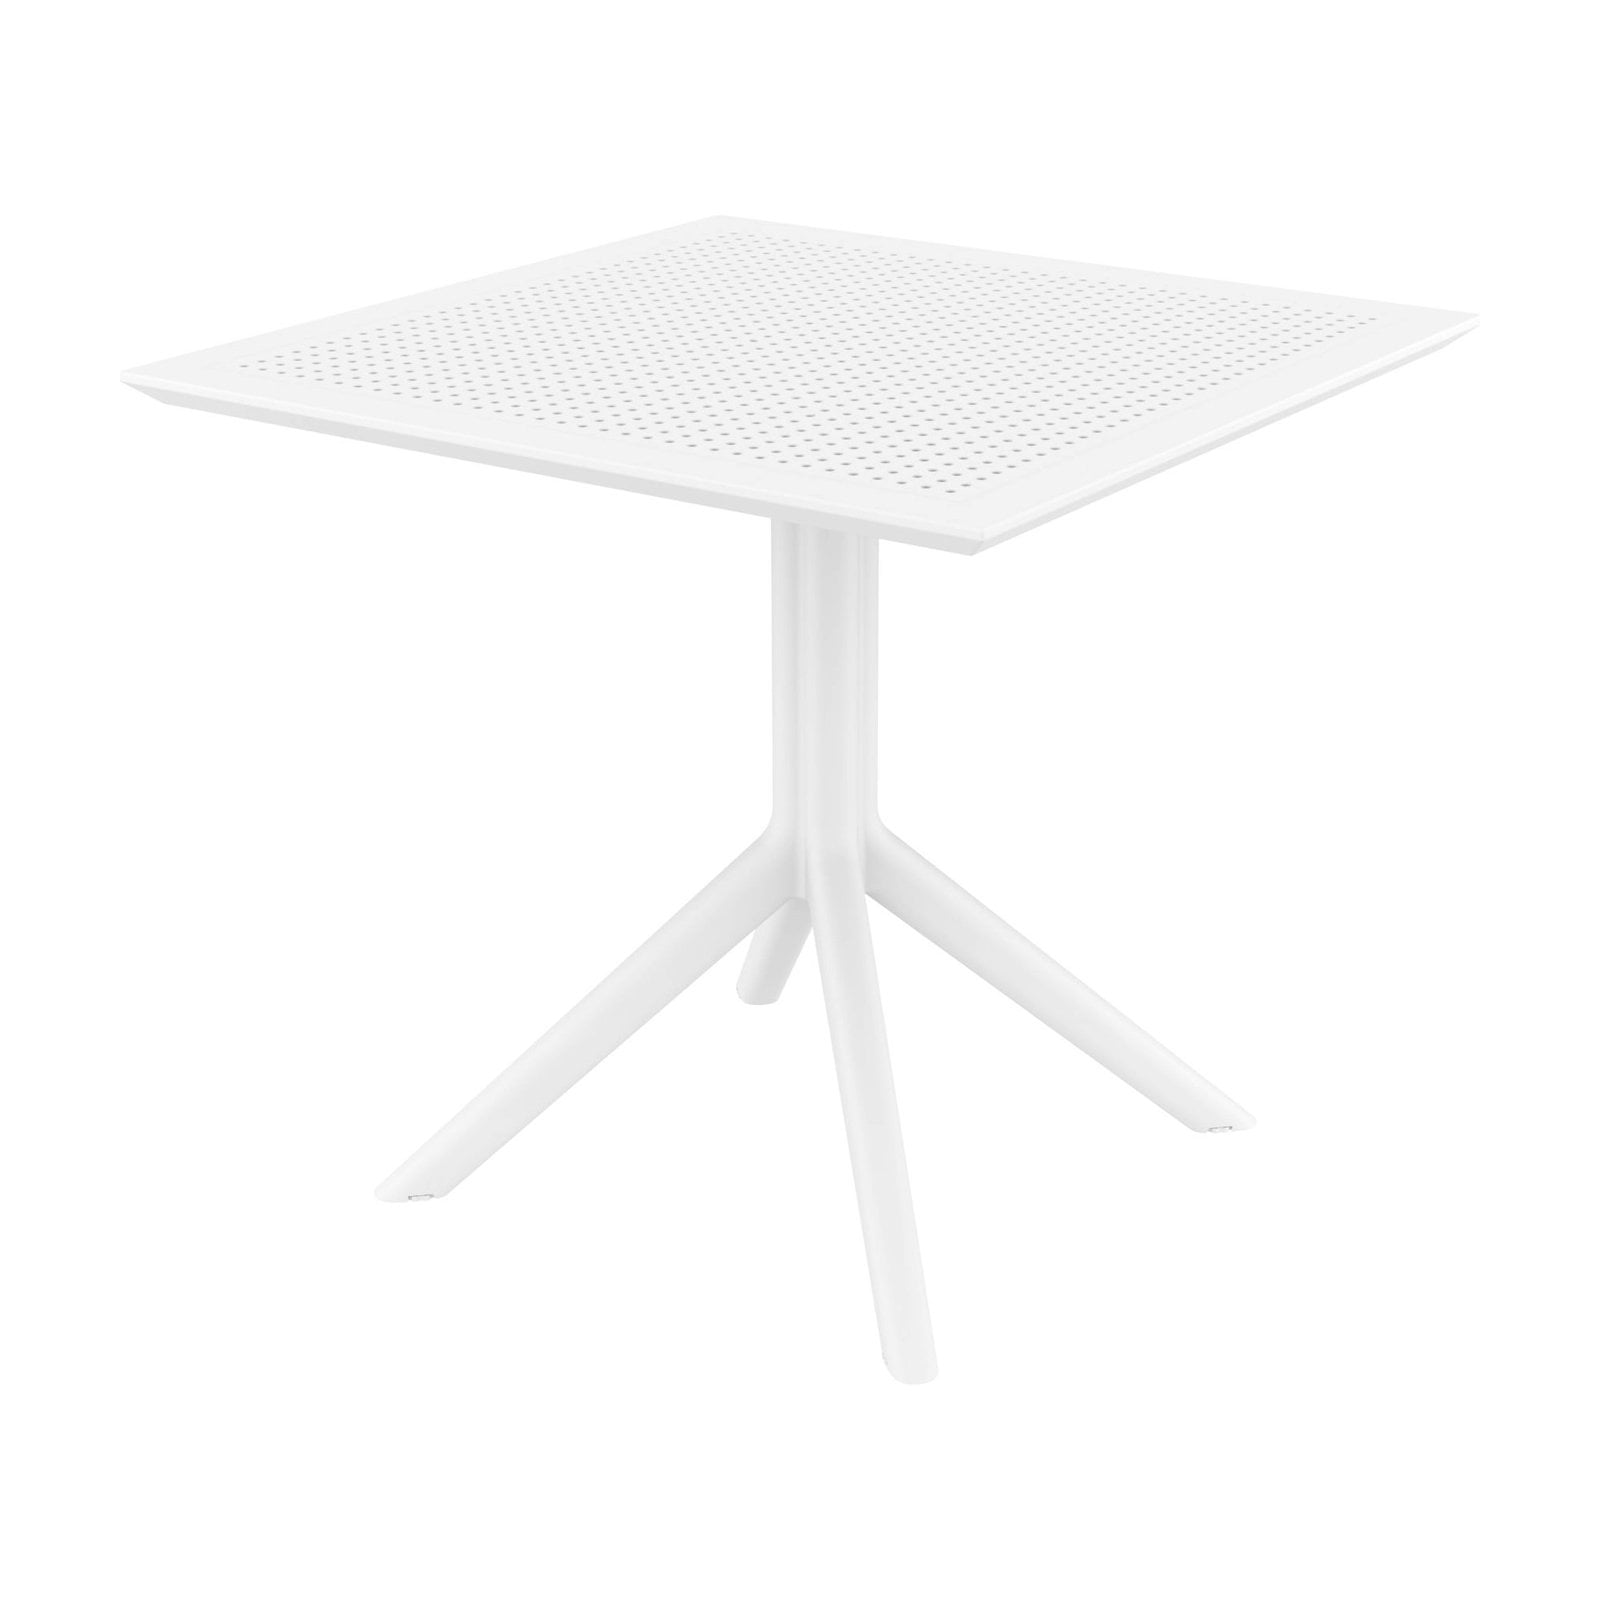 Isp106-whi 31 In. Sky Square Table, White